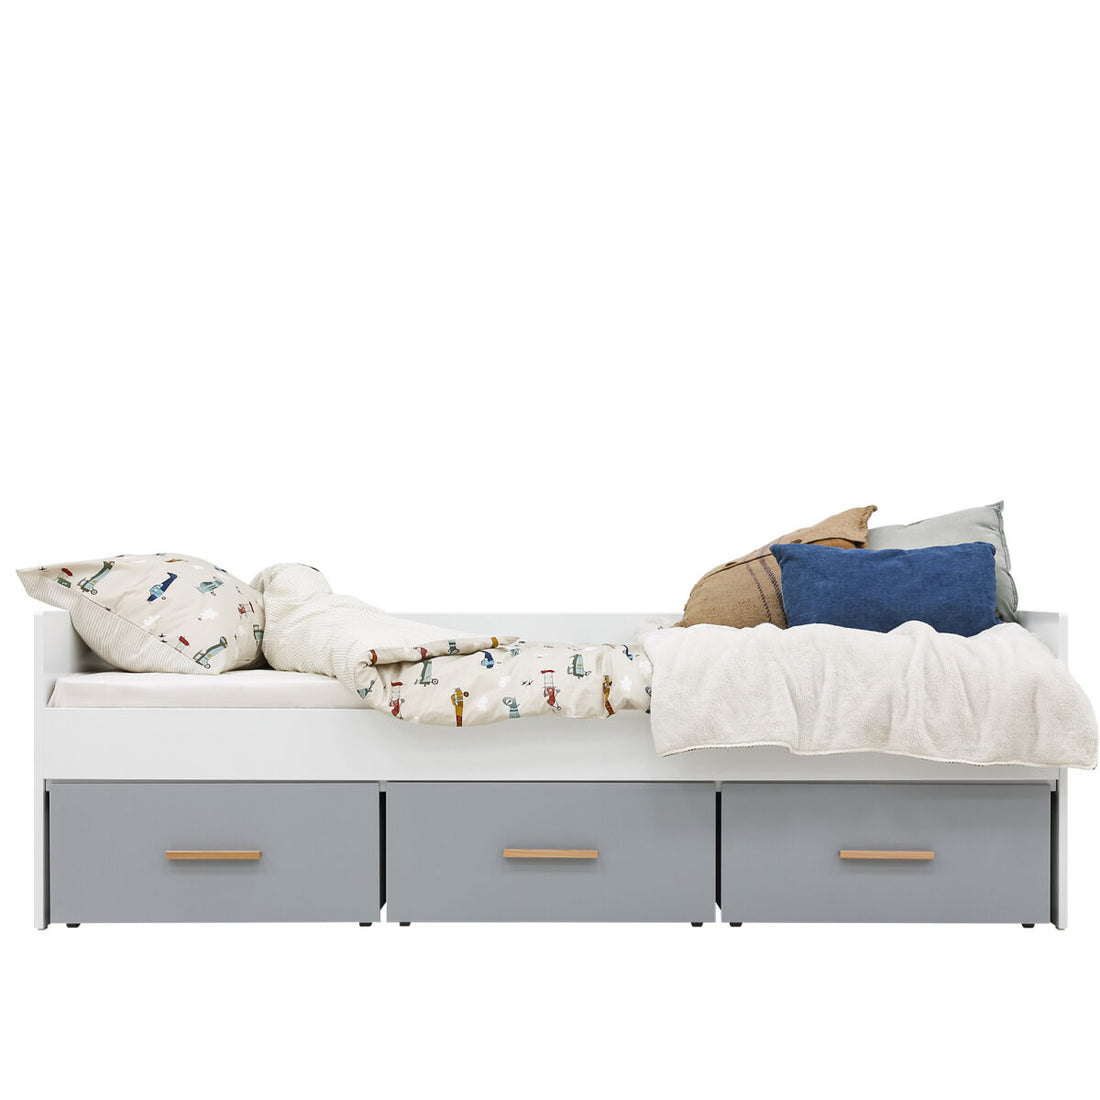 bopita-bench-bed-90x200-with-3-drawers-emma-white-grey-with-bed-base-bopt-17090200-bopt-26920961-set- (7)